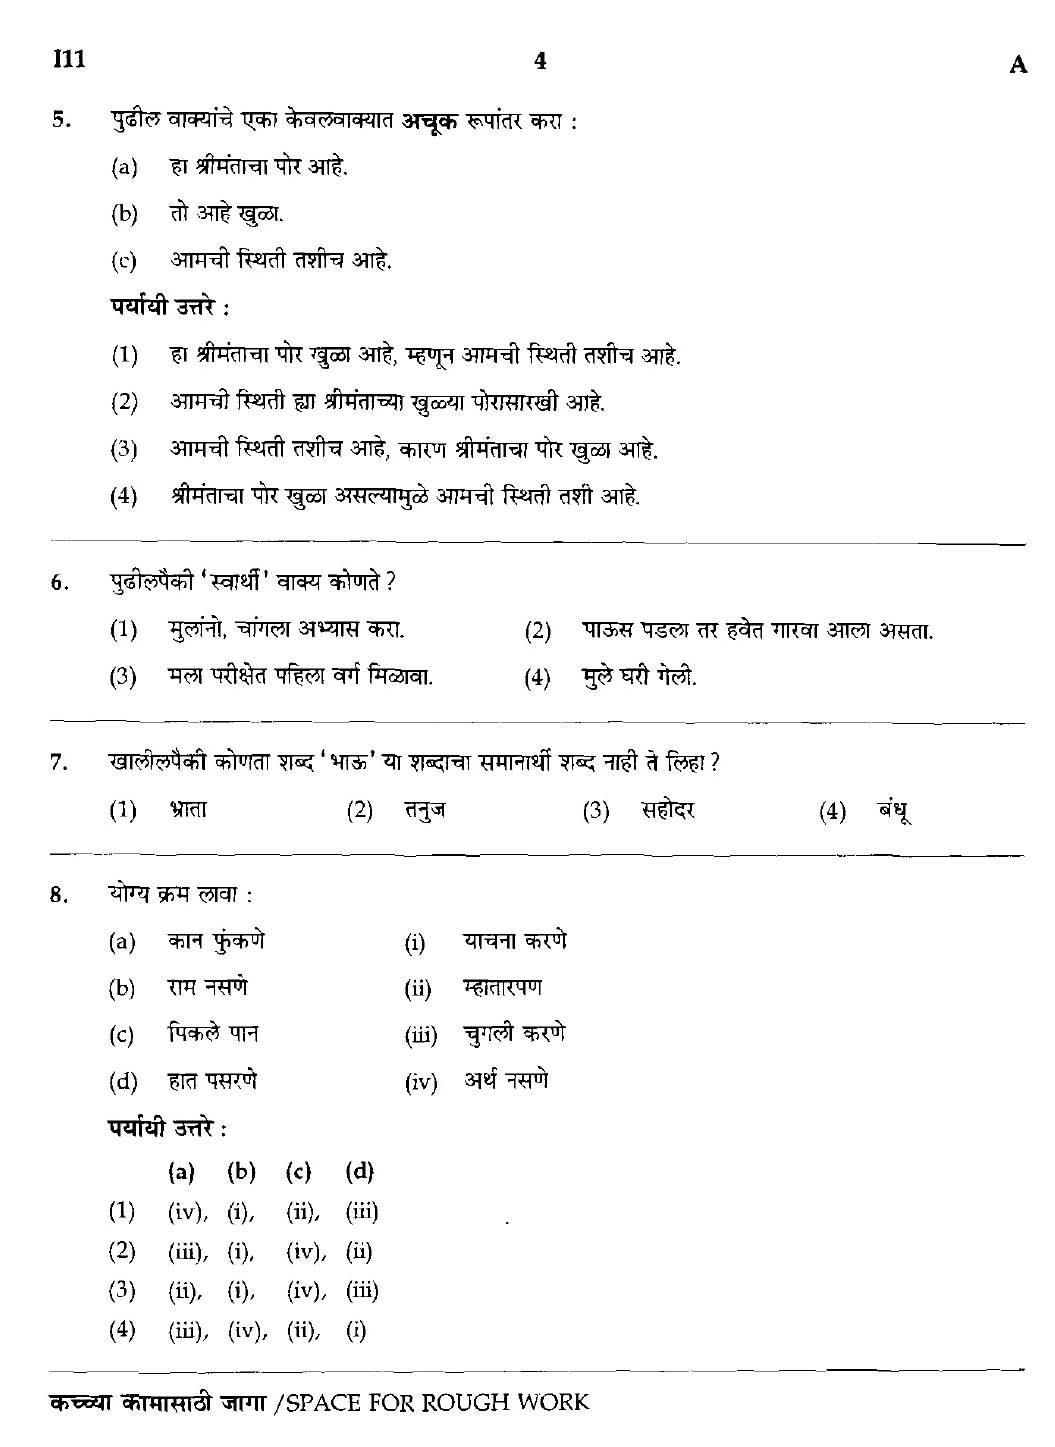 MPSC Agricultural Services Preliminary Exam 2018 Question Paper 3